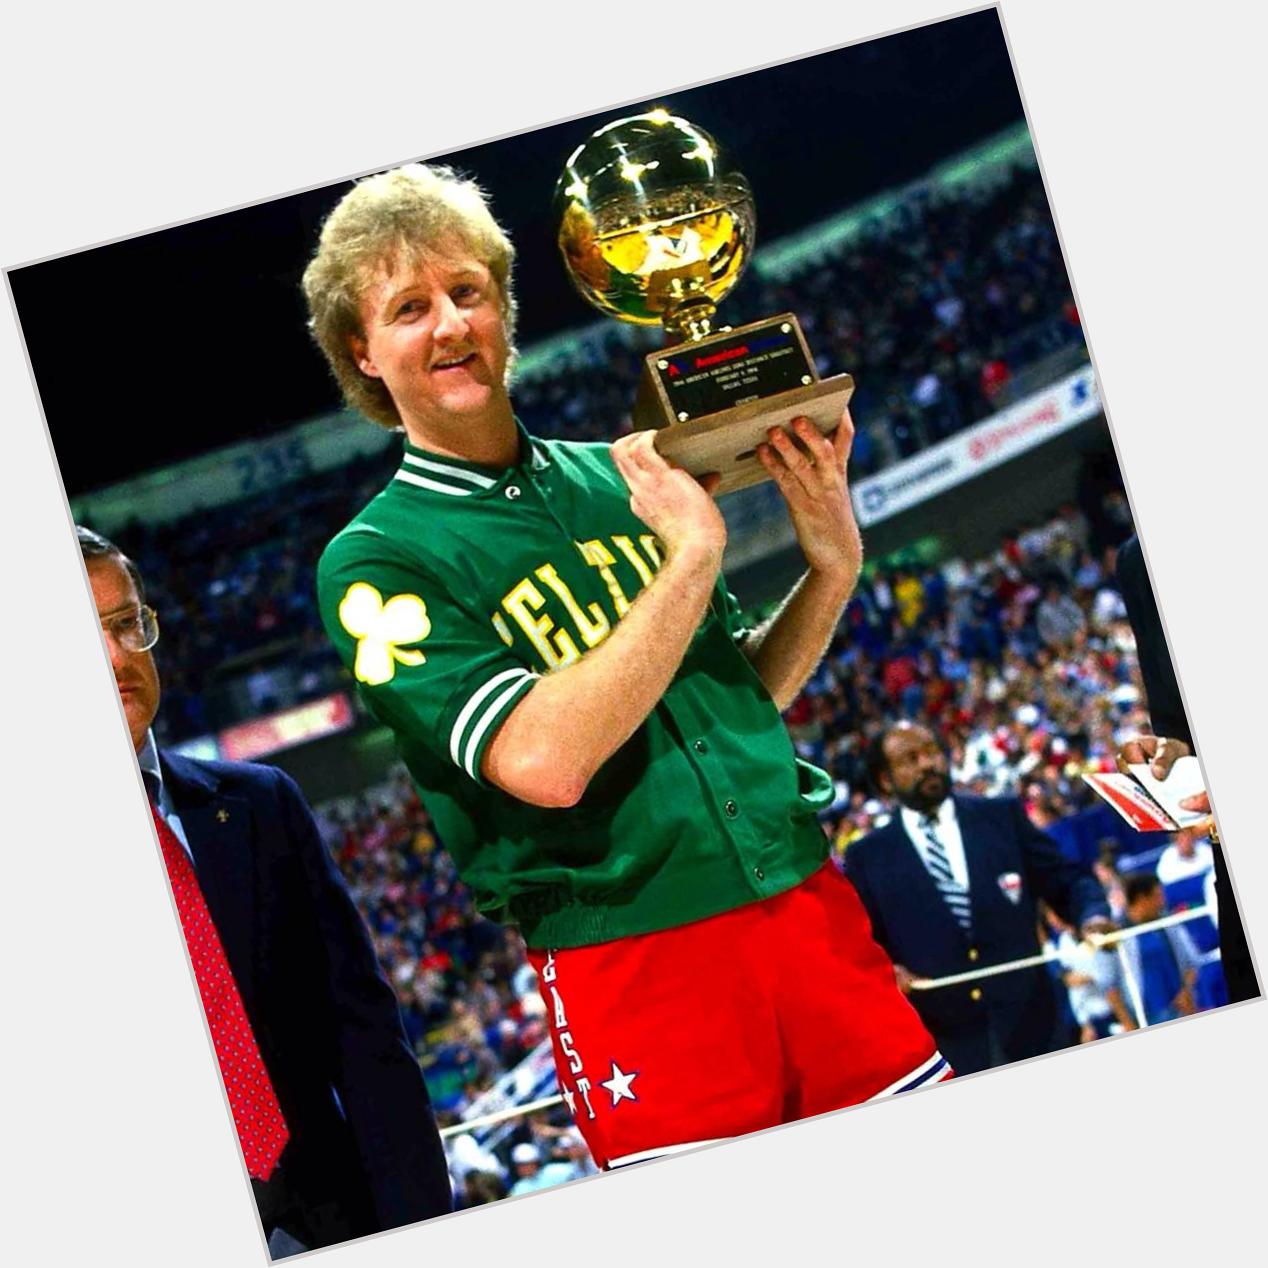   Happy Birthday to one of the greatest players of all-time, Larry Bird! 